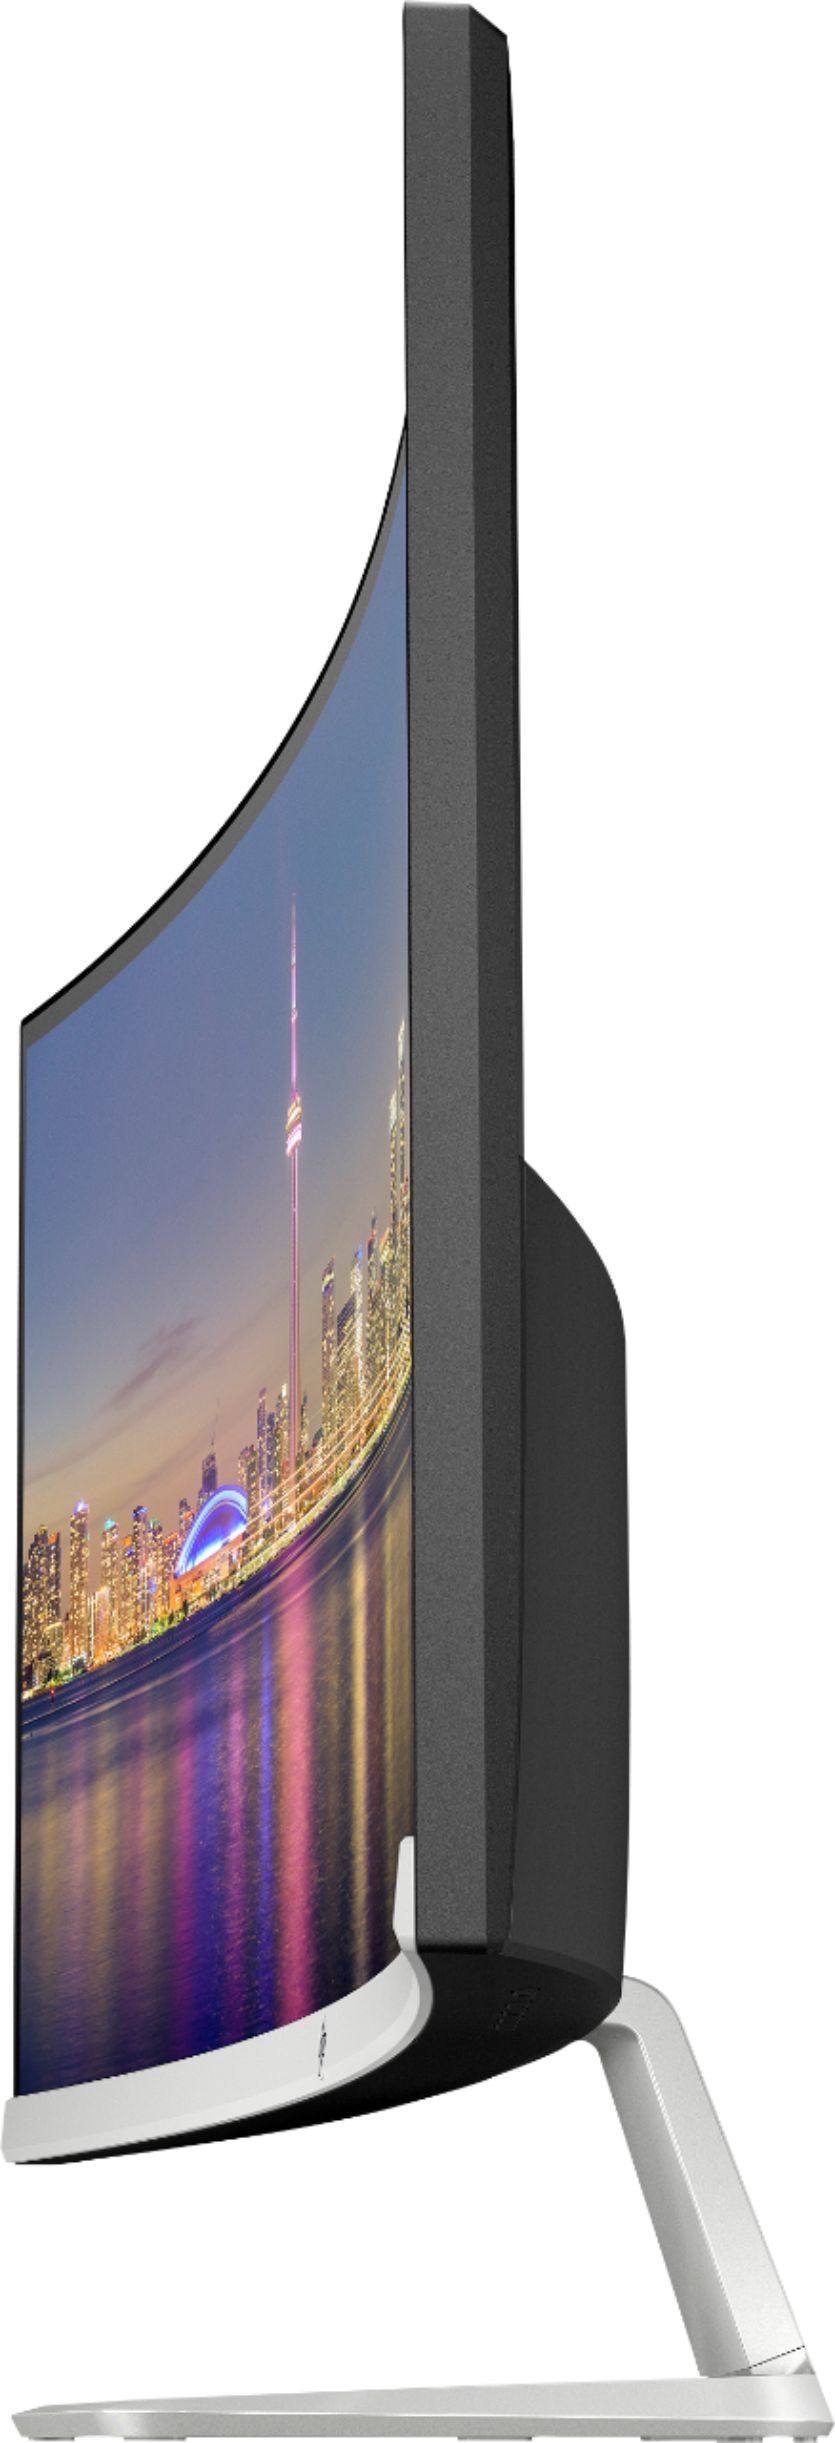 34 HP 34f Curved Display - Specifications